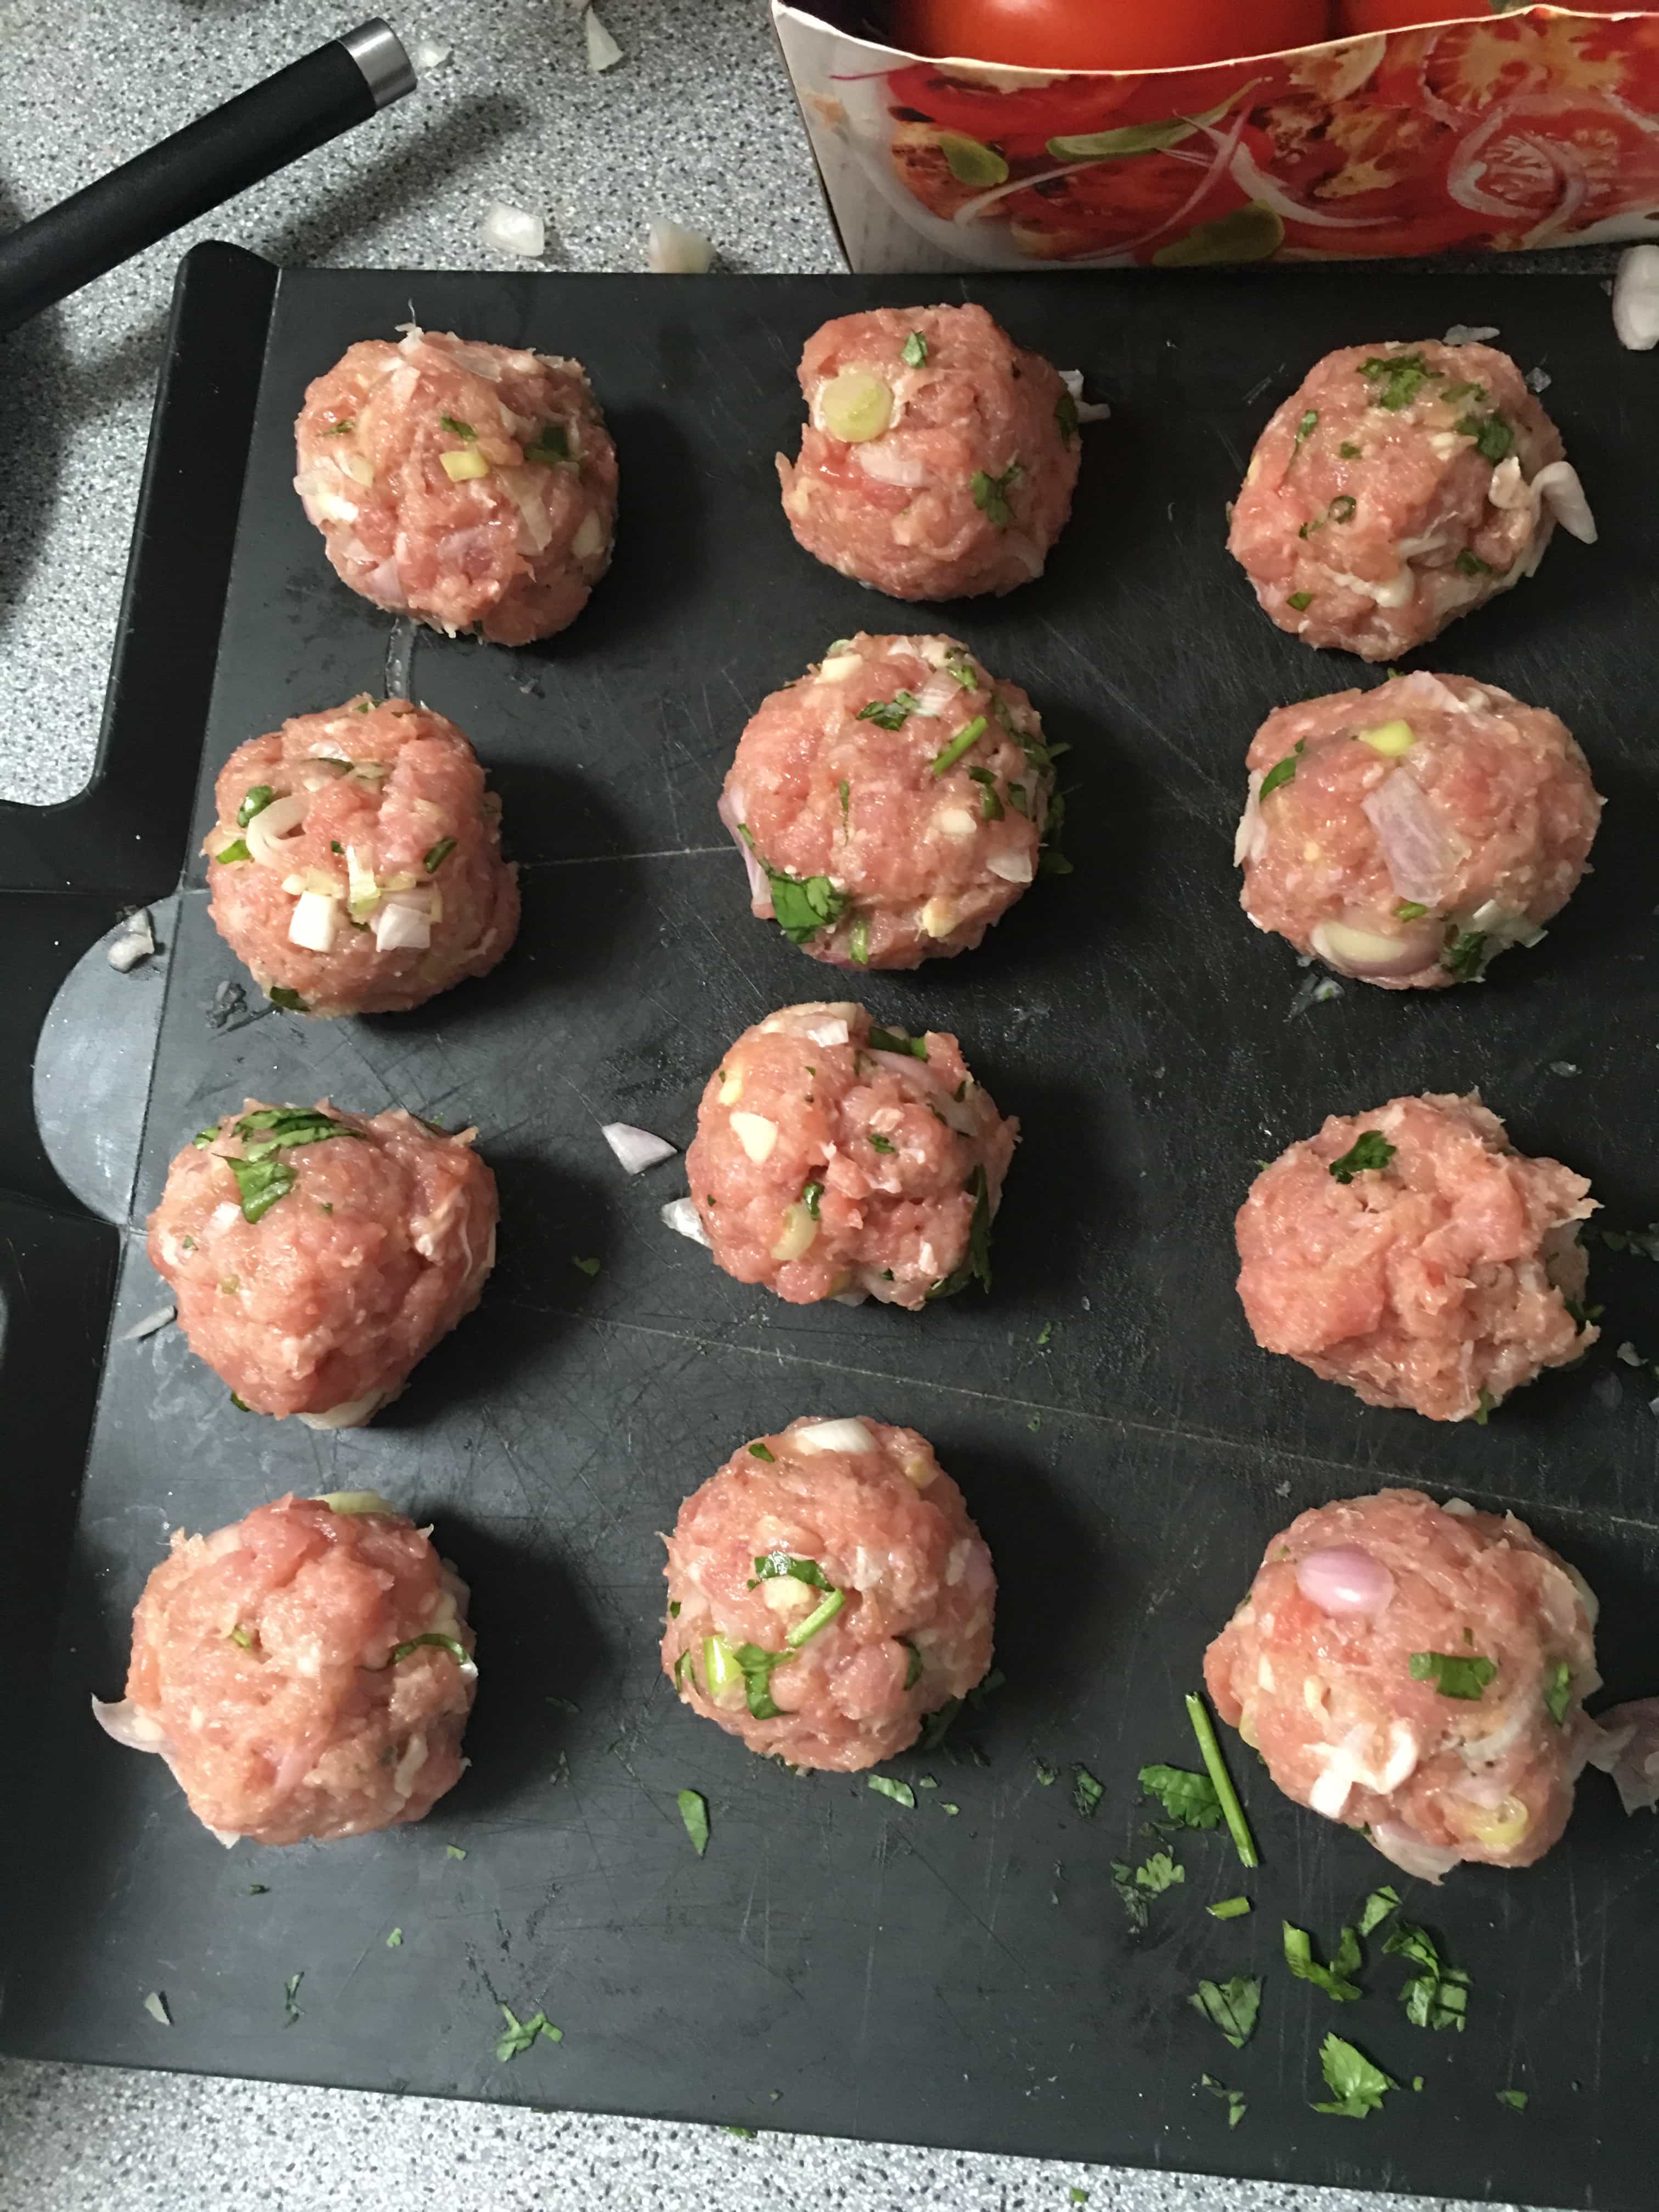 meatballs all lined up